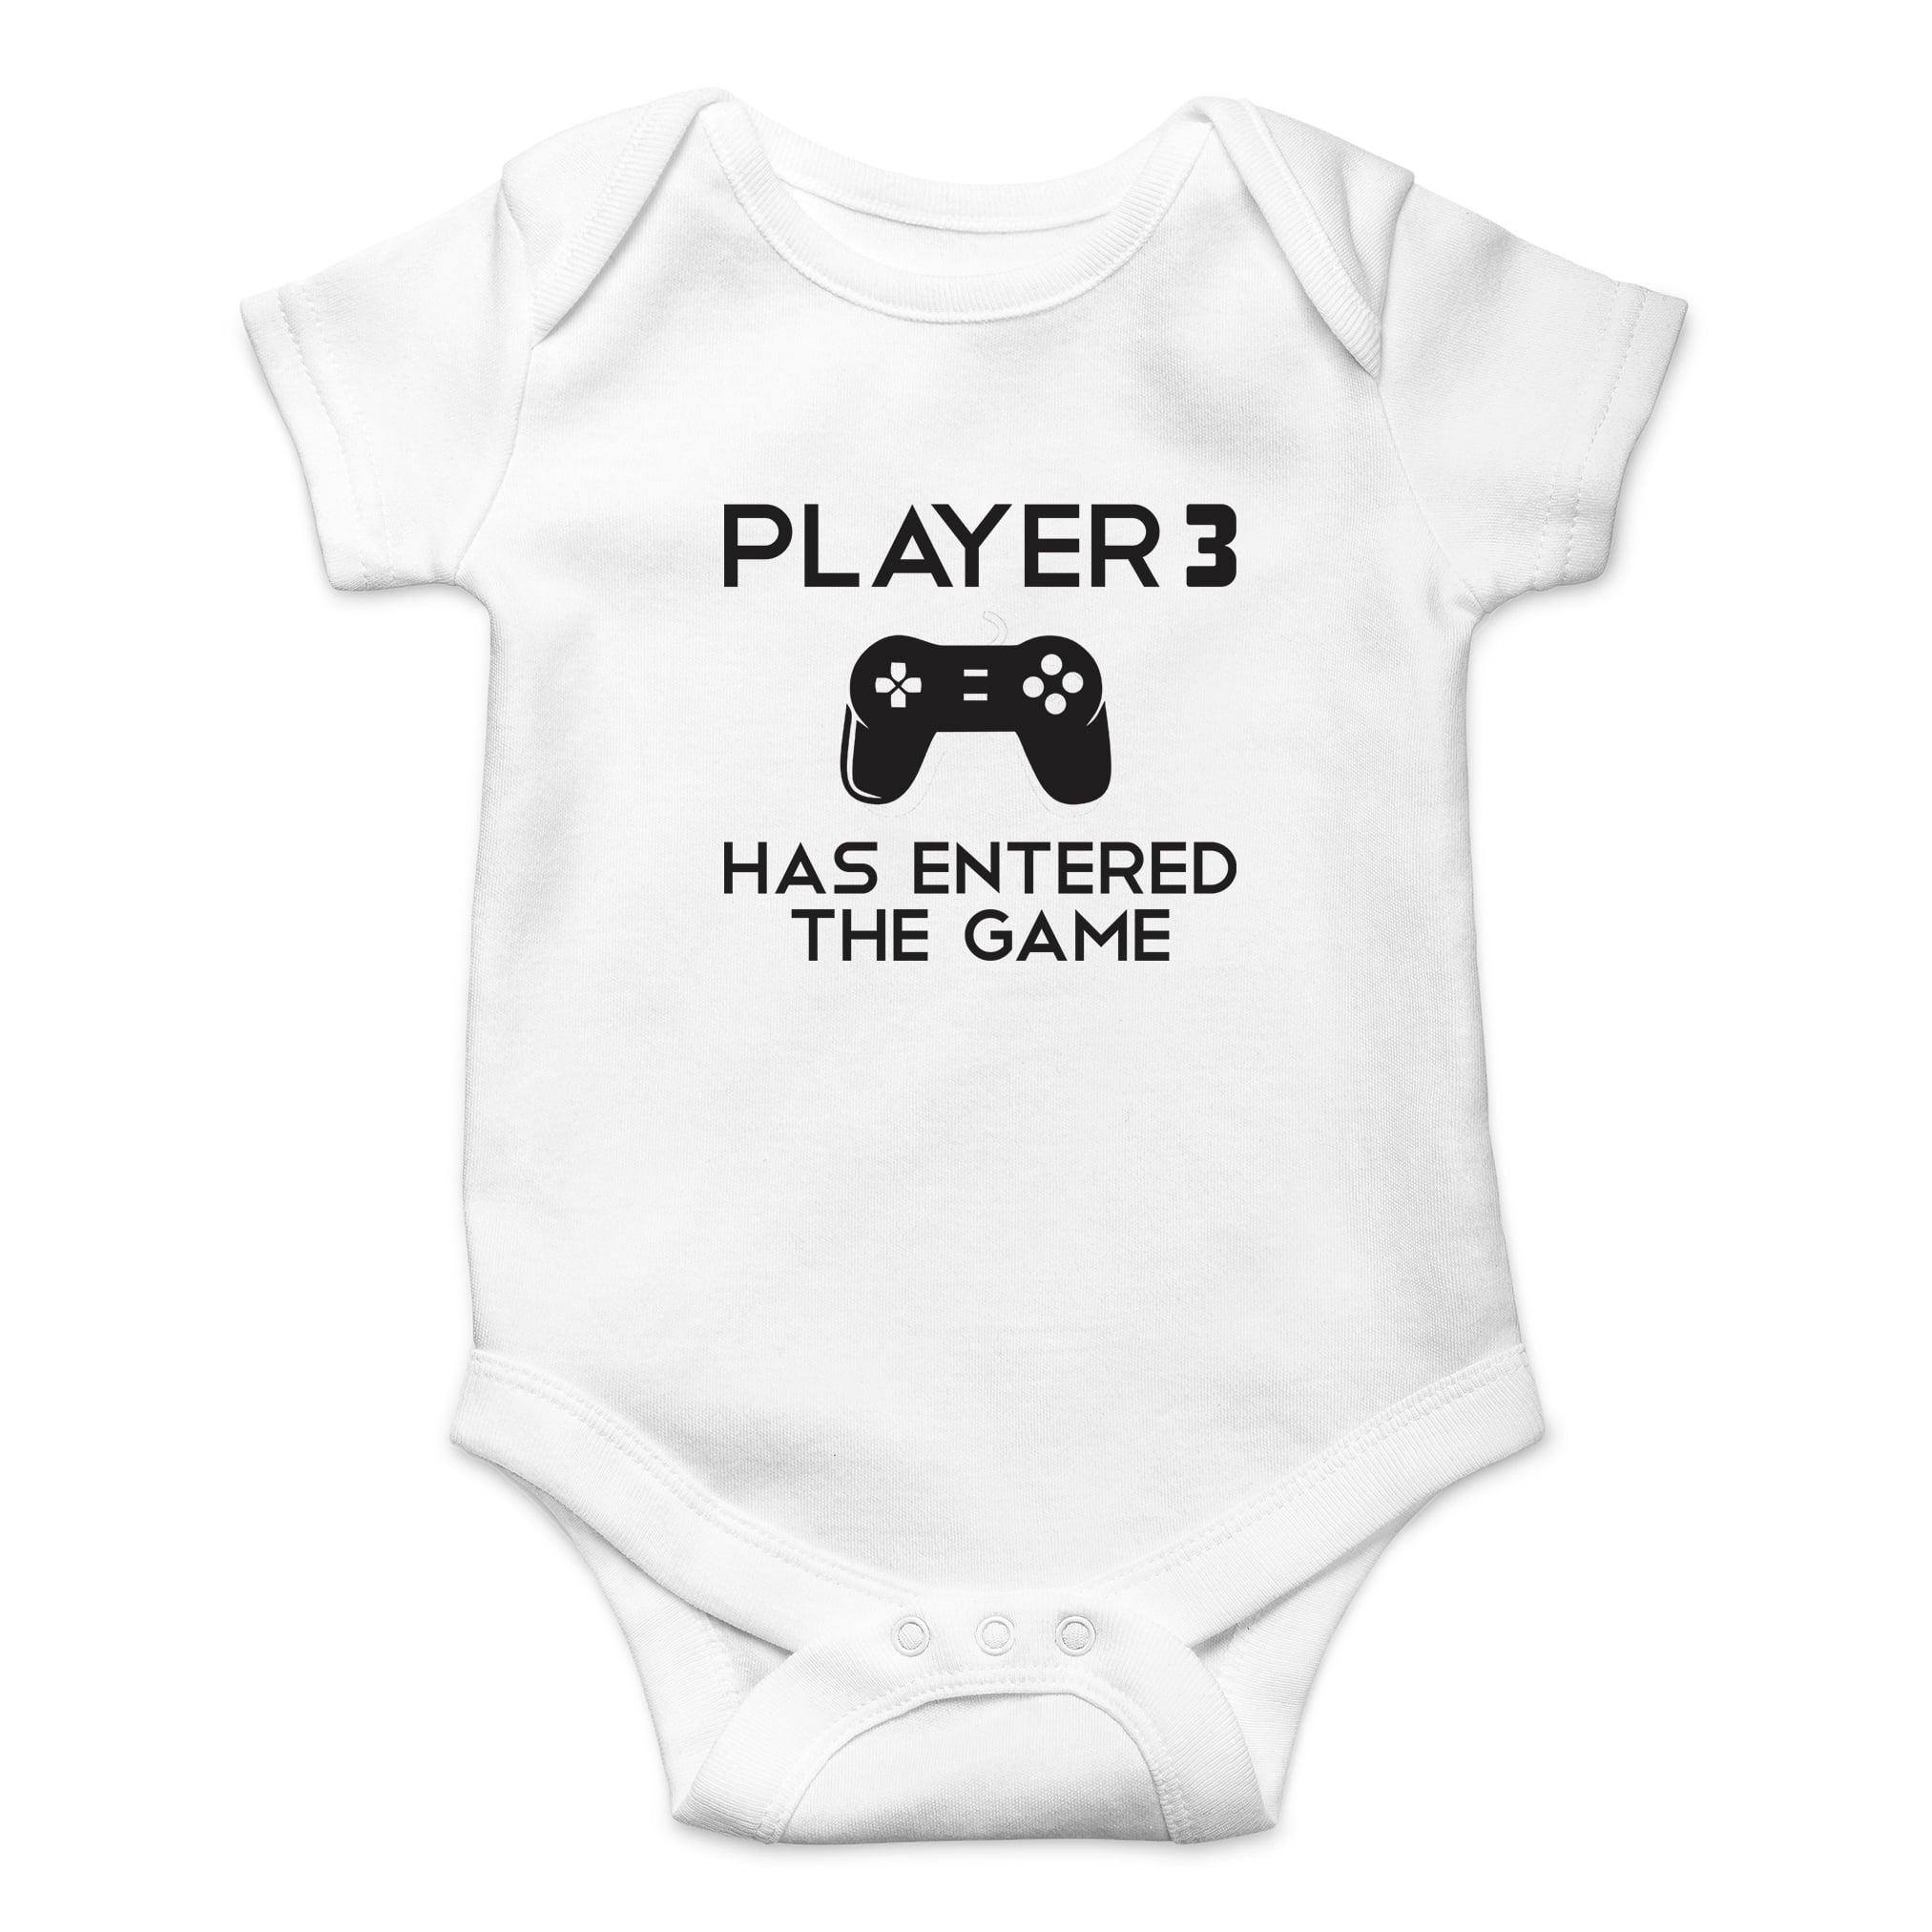 PLAYER 3 HAS ENTERED THE GAME BABY GROW VEST BODY SUIT FUNNY NOVELTY GAMER GEEK 